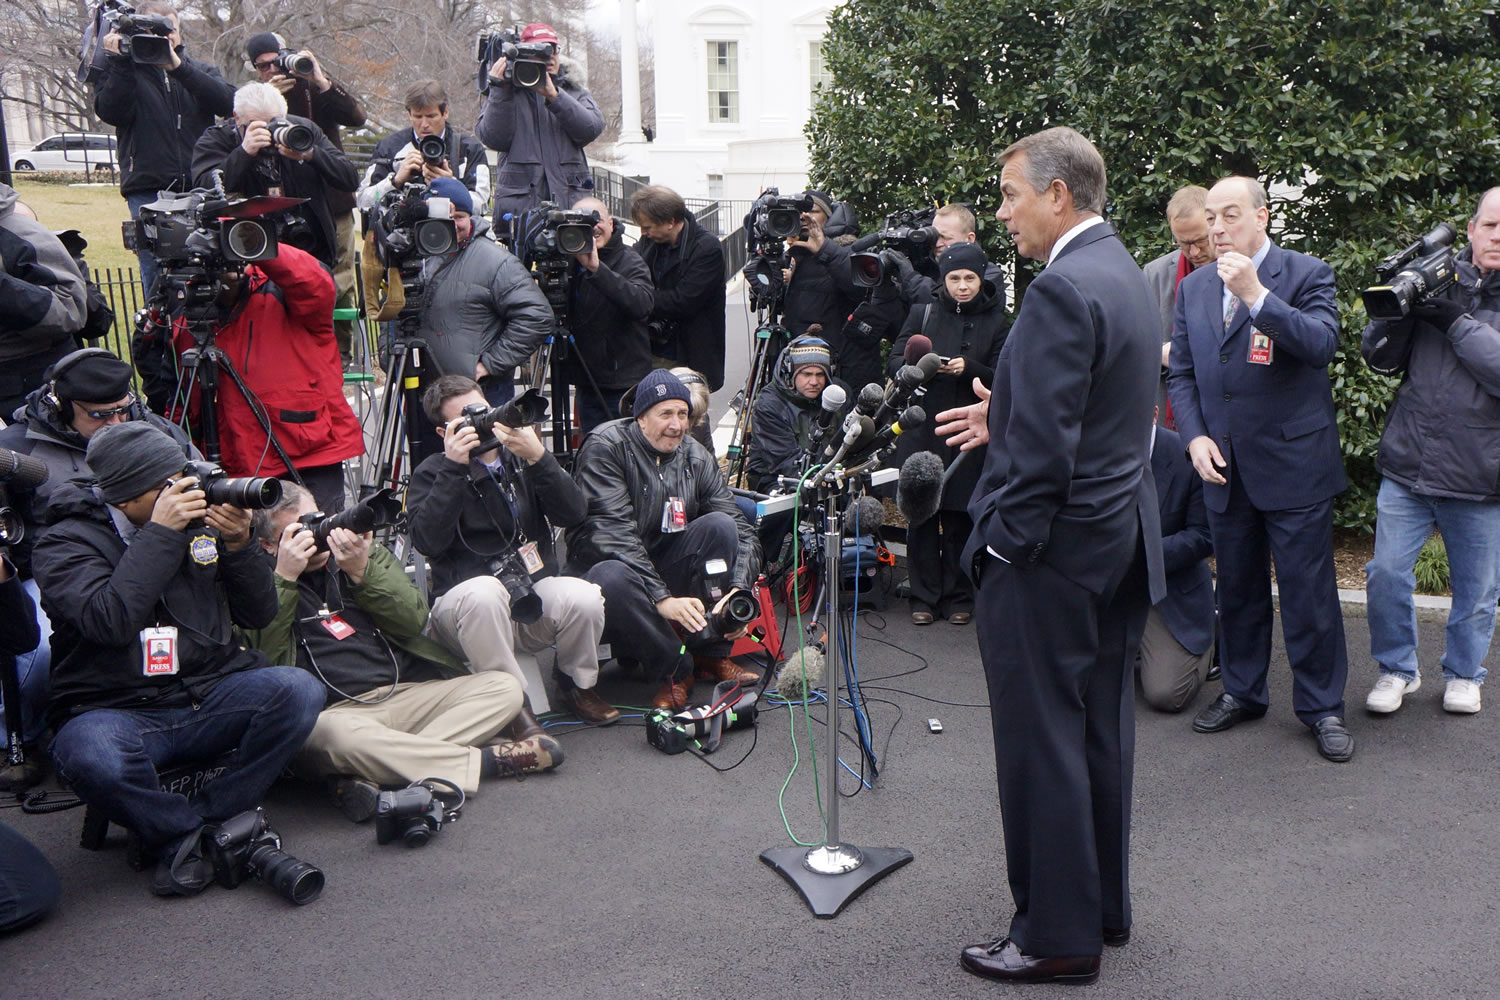 House Speaker John Boehner of Ohio talks to reporters outside the White House in Washington, Friday, March 1, 2013, following a meeting with President Barack Obama and Congressional leaders regarding the automatic spending cuts.